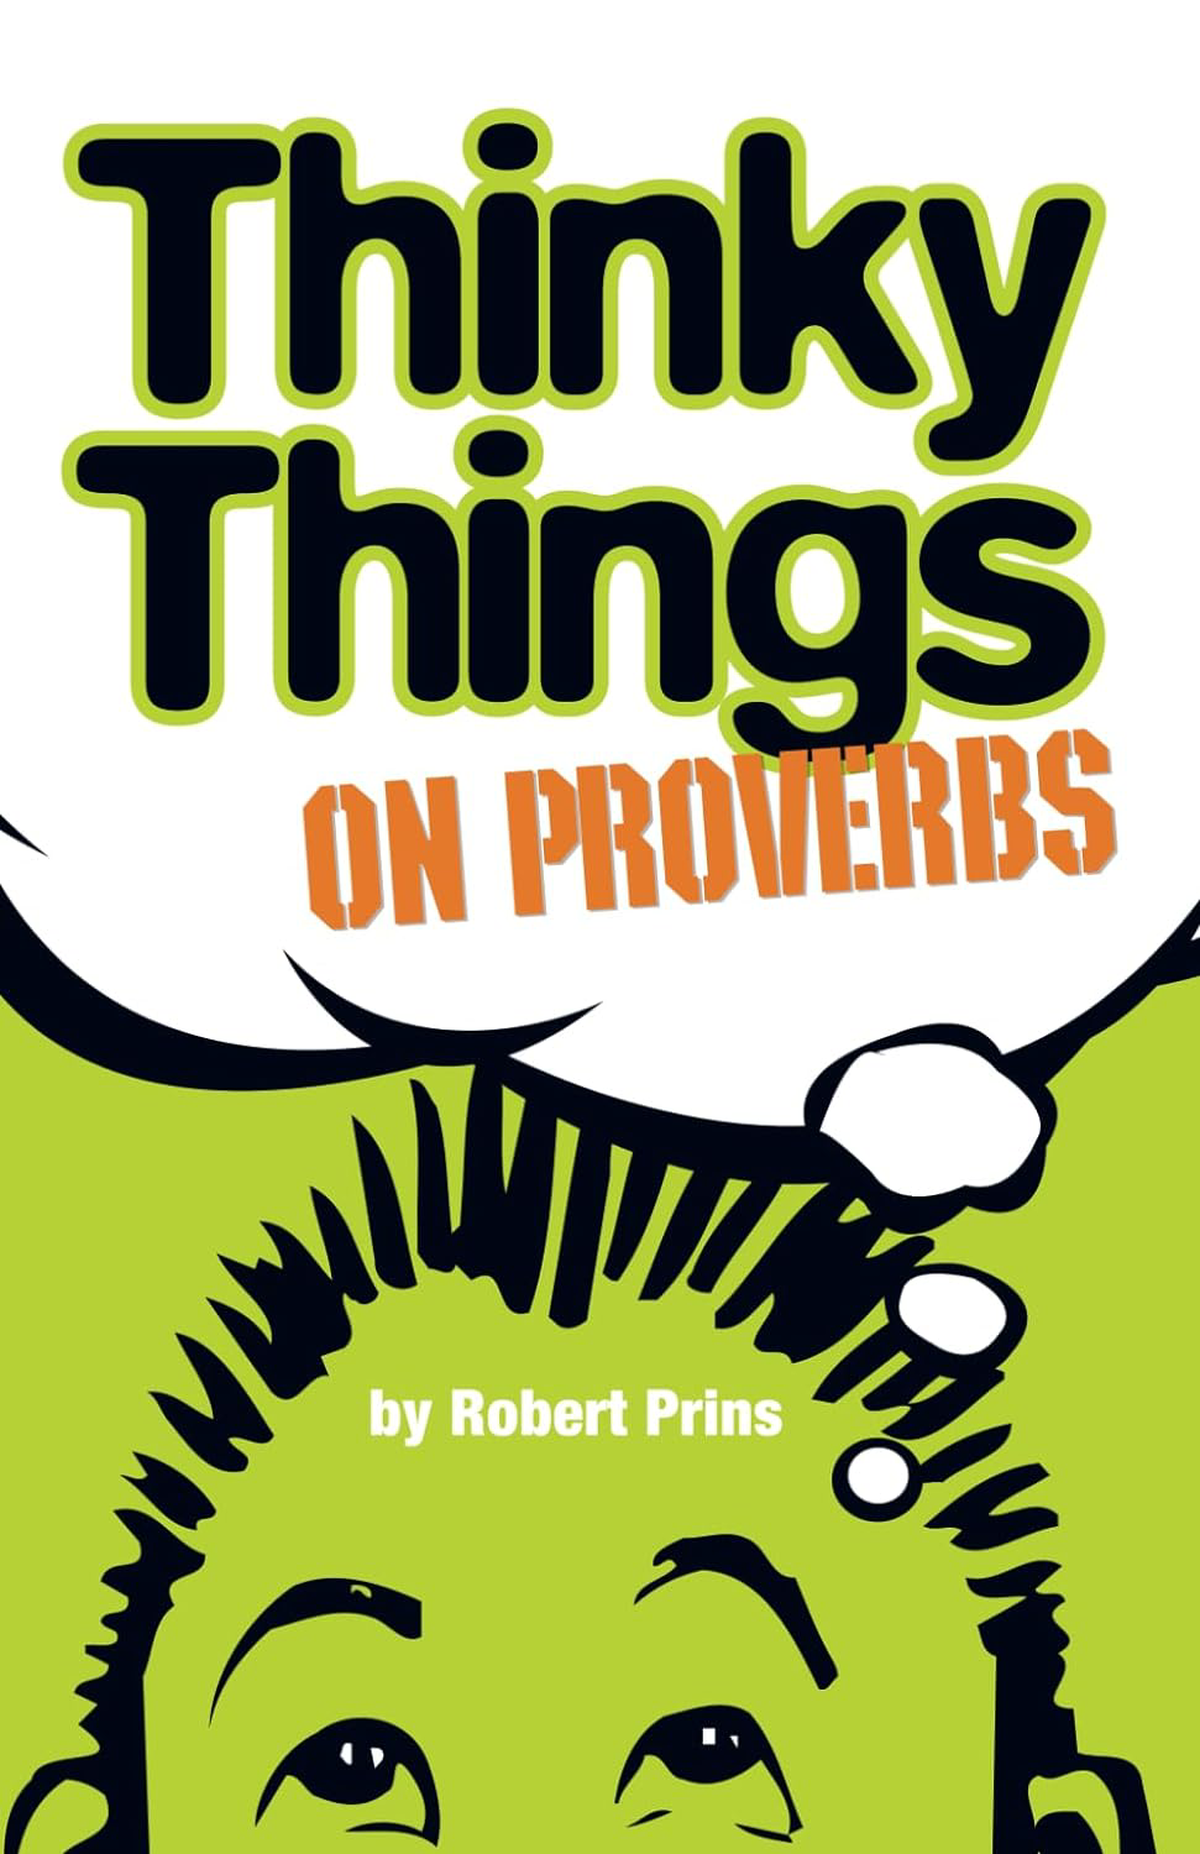 Thinky Things on Proverbs